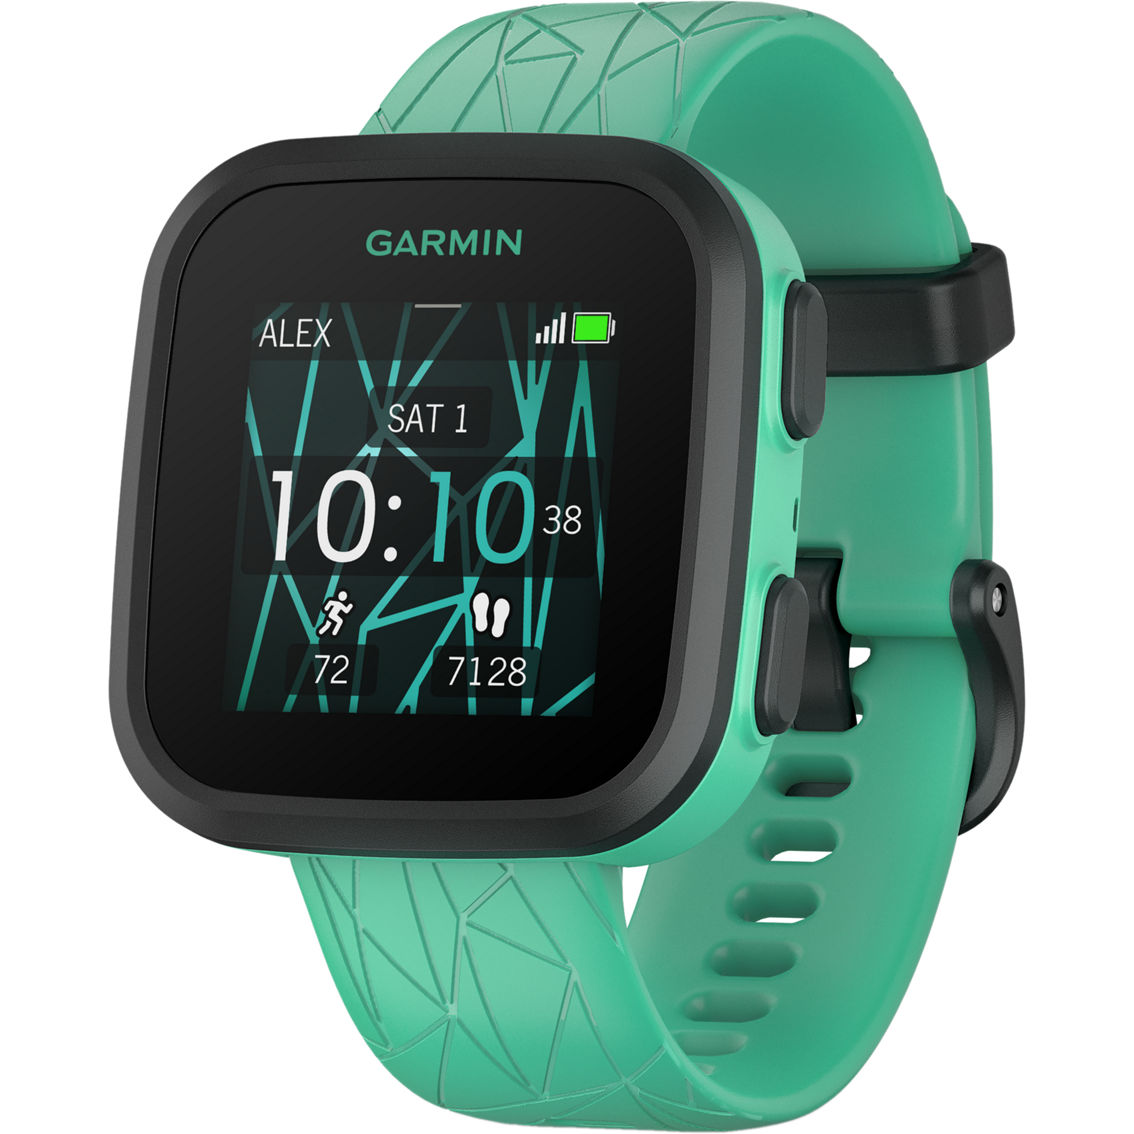 Garmin Kids Smart Watch Bounce Black Bezel and Case with Silicone Band - Image 2 of 5